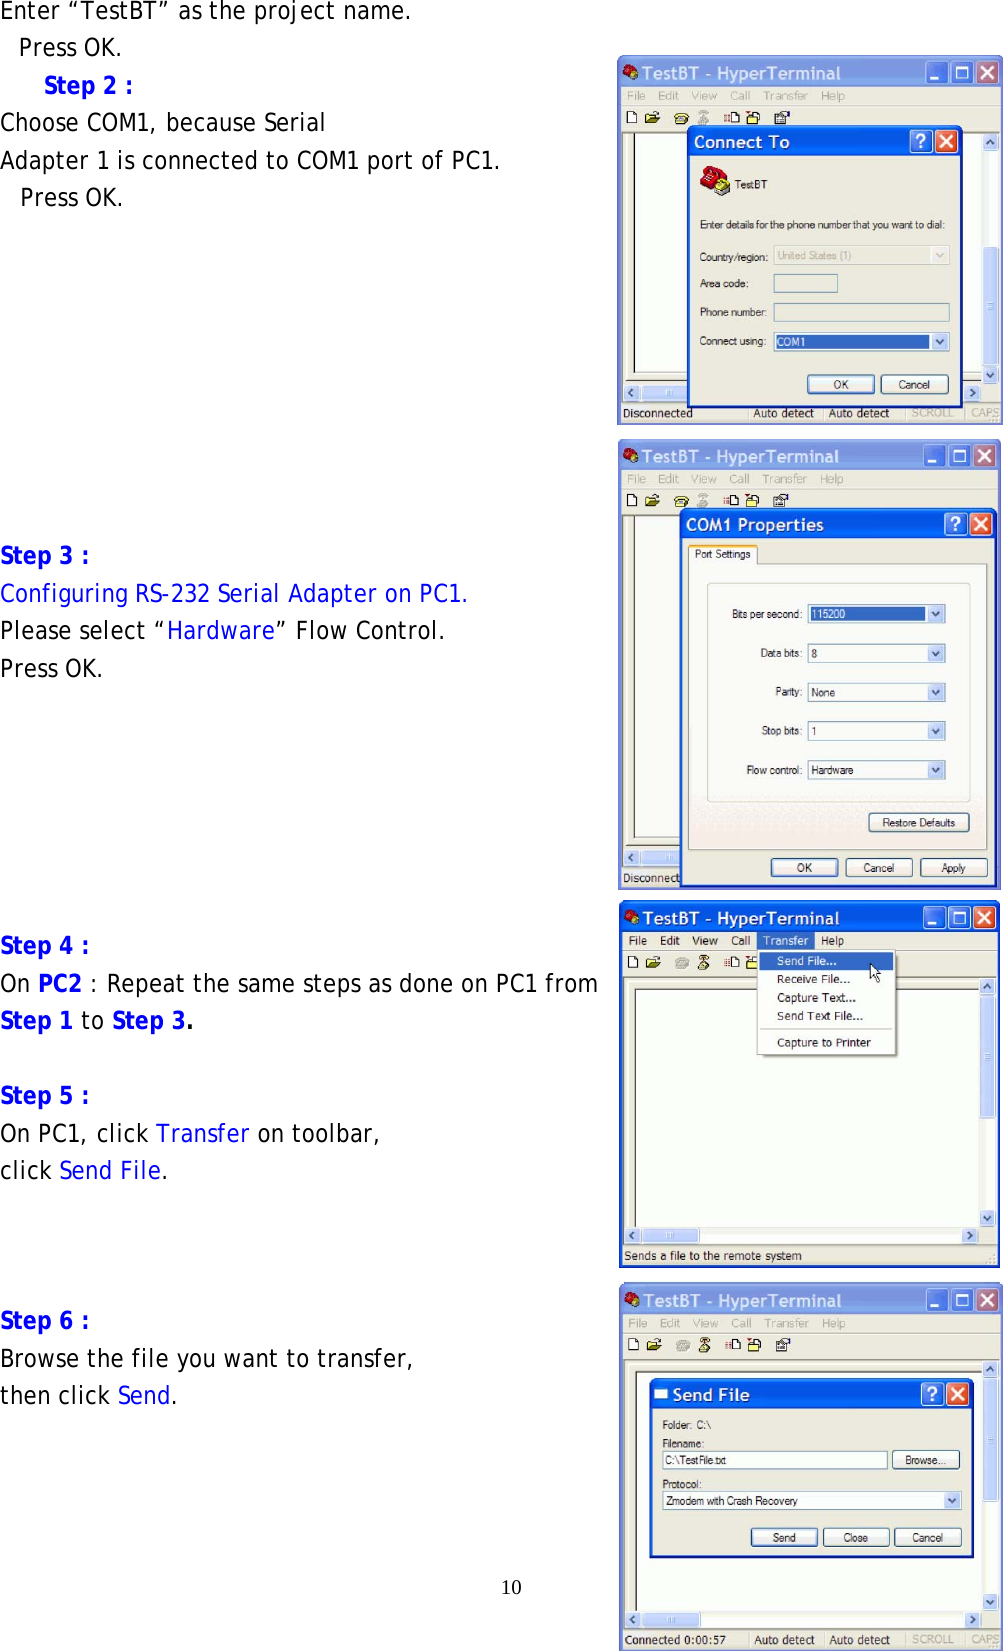    10 Enter “TestBT” as the project name. Press OK. Step 2 : Choose COM1, because Serial Adapter 1 is connected to COM1 port of PC1. Press OK.         Step 3 : Configuring RS-232 Serial Adapter on PC1.   Please select “Hardware” Flow Control. Press OK.       Step 4 : On PC2 : Repeat the same steps as done on PC1 from Step 1 to Step 3.  Step 5 : On PC1, click Transfer on toolbar, click Send File.    Step 6 :   Browse the file you want to transfer, then click Send.   